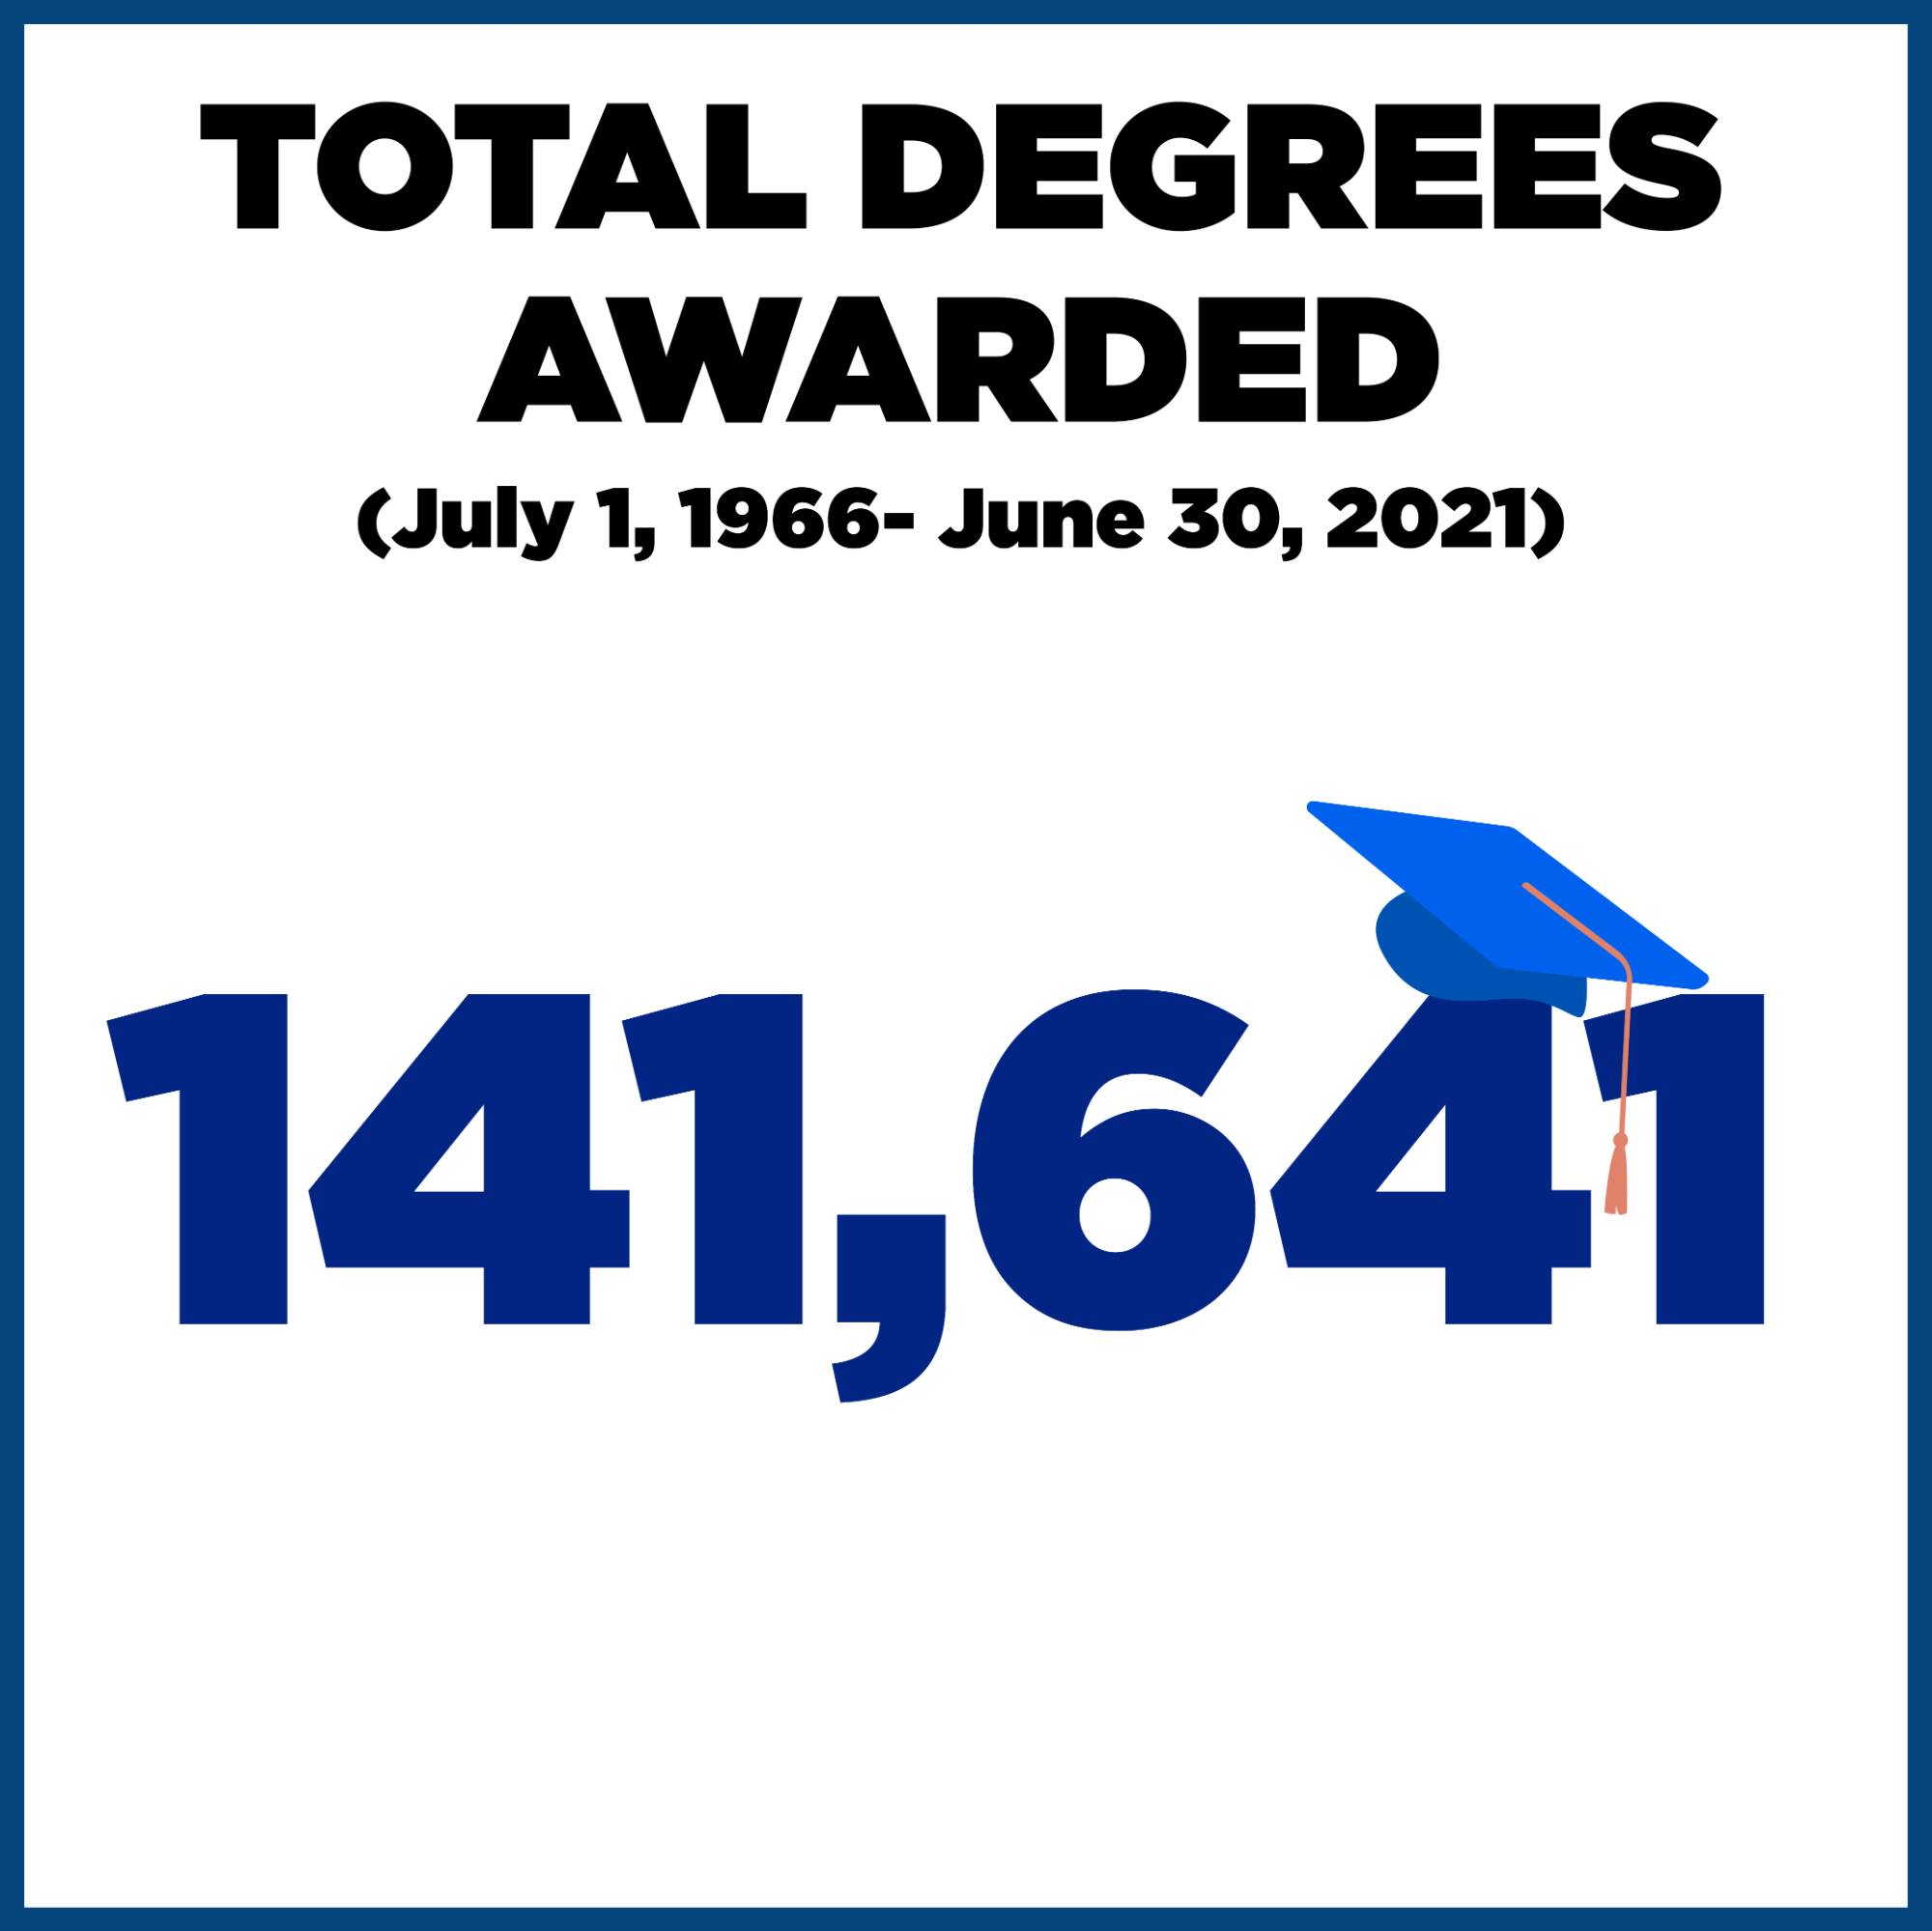 There have been a total of 141,641 degrees awarded at Grand Valley from July 1, 1966 to June 30, 2021.